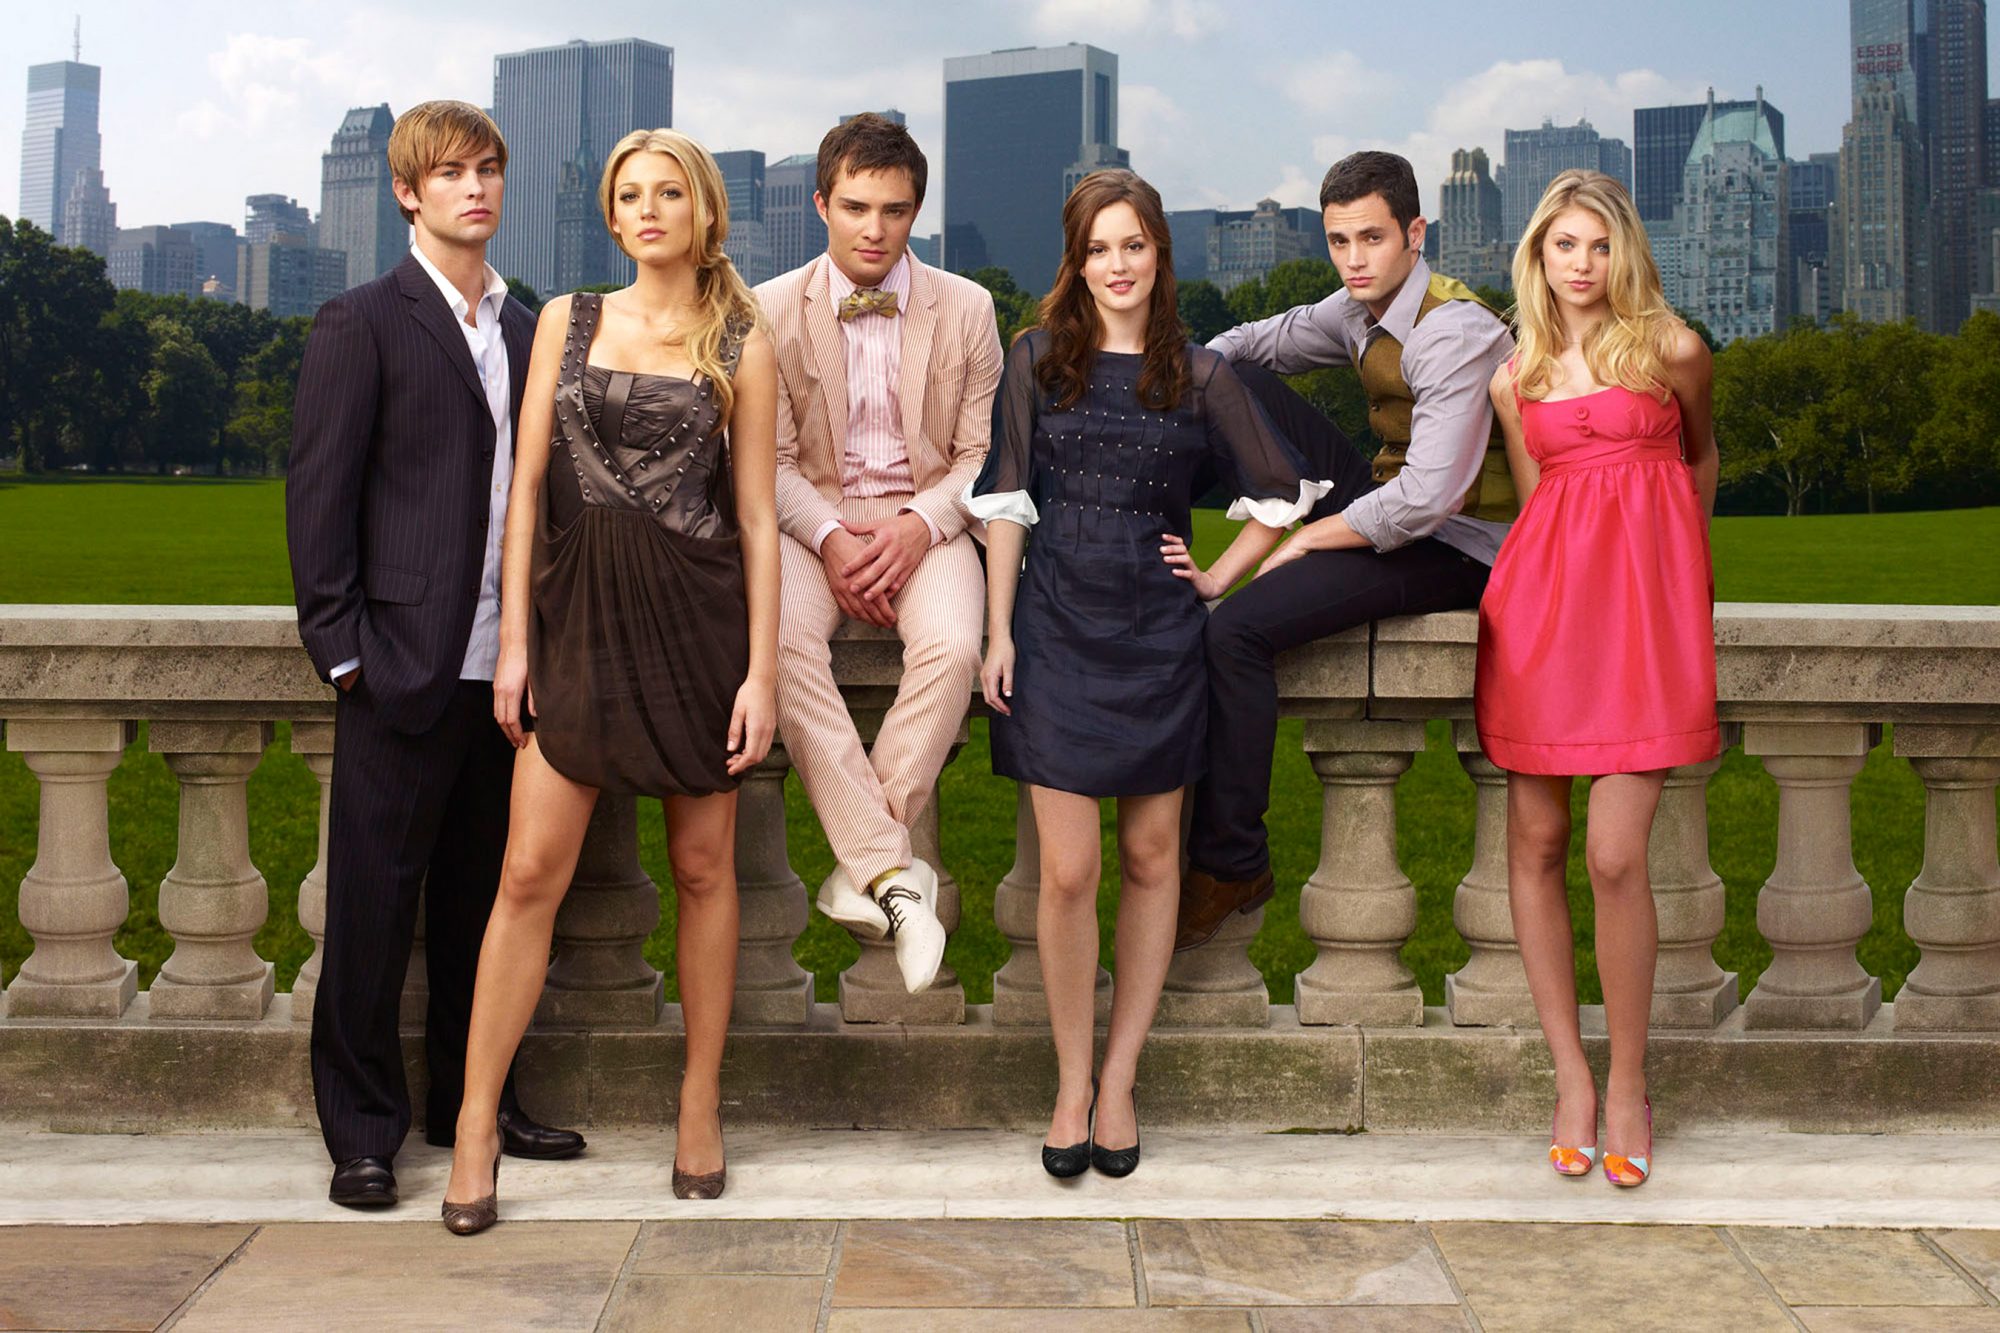 Spotted on the steps of the MET: the Cast of the Gossip Girl Reboot.